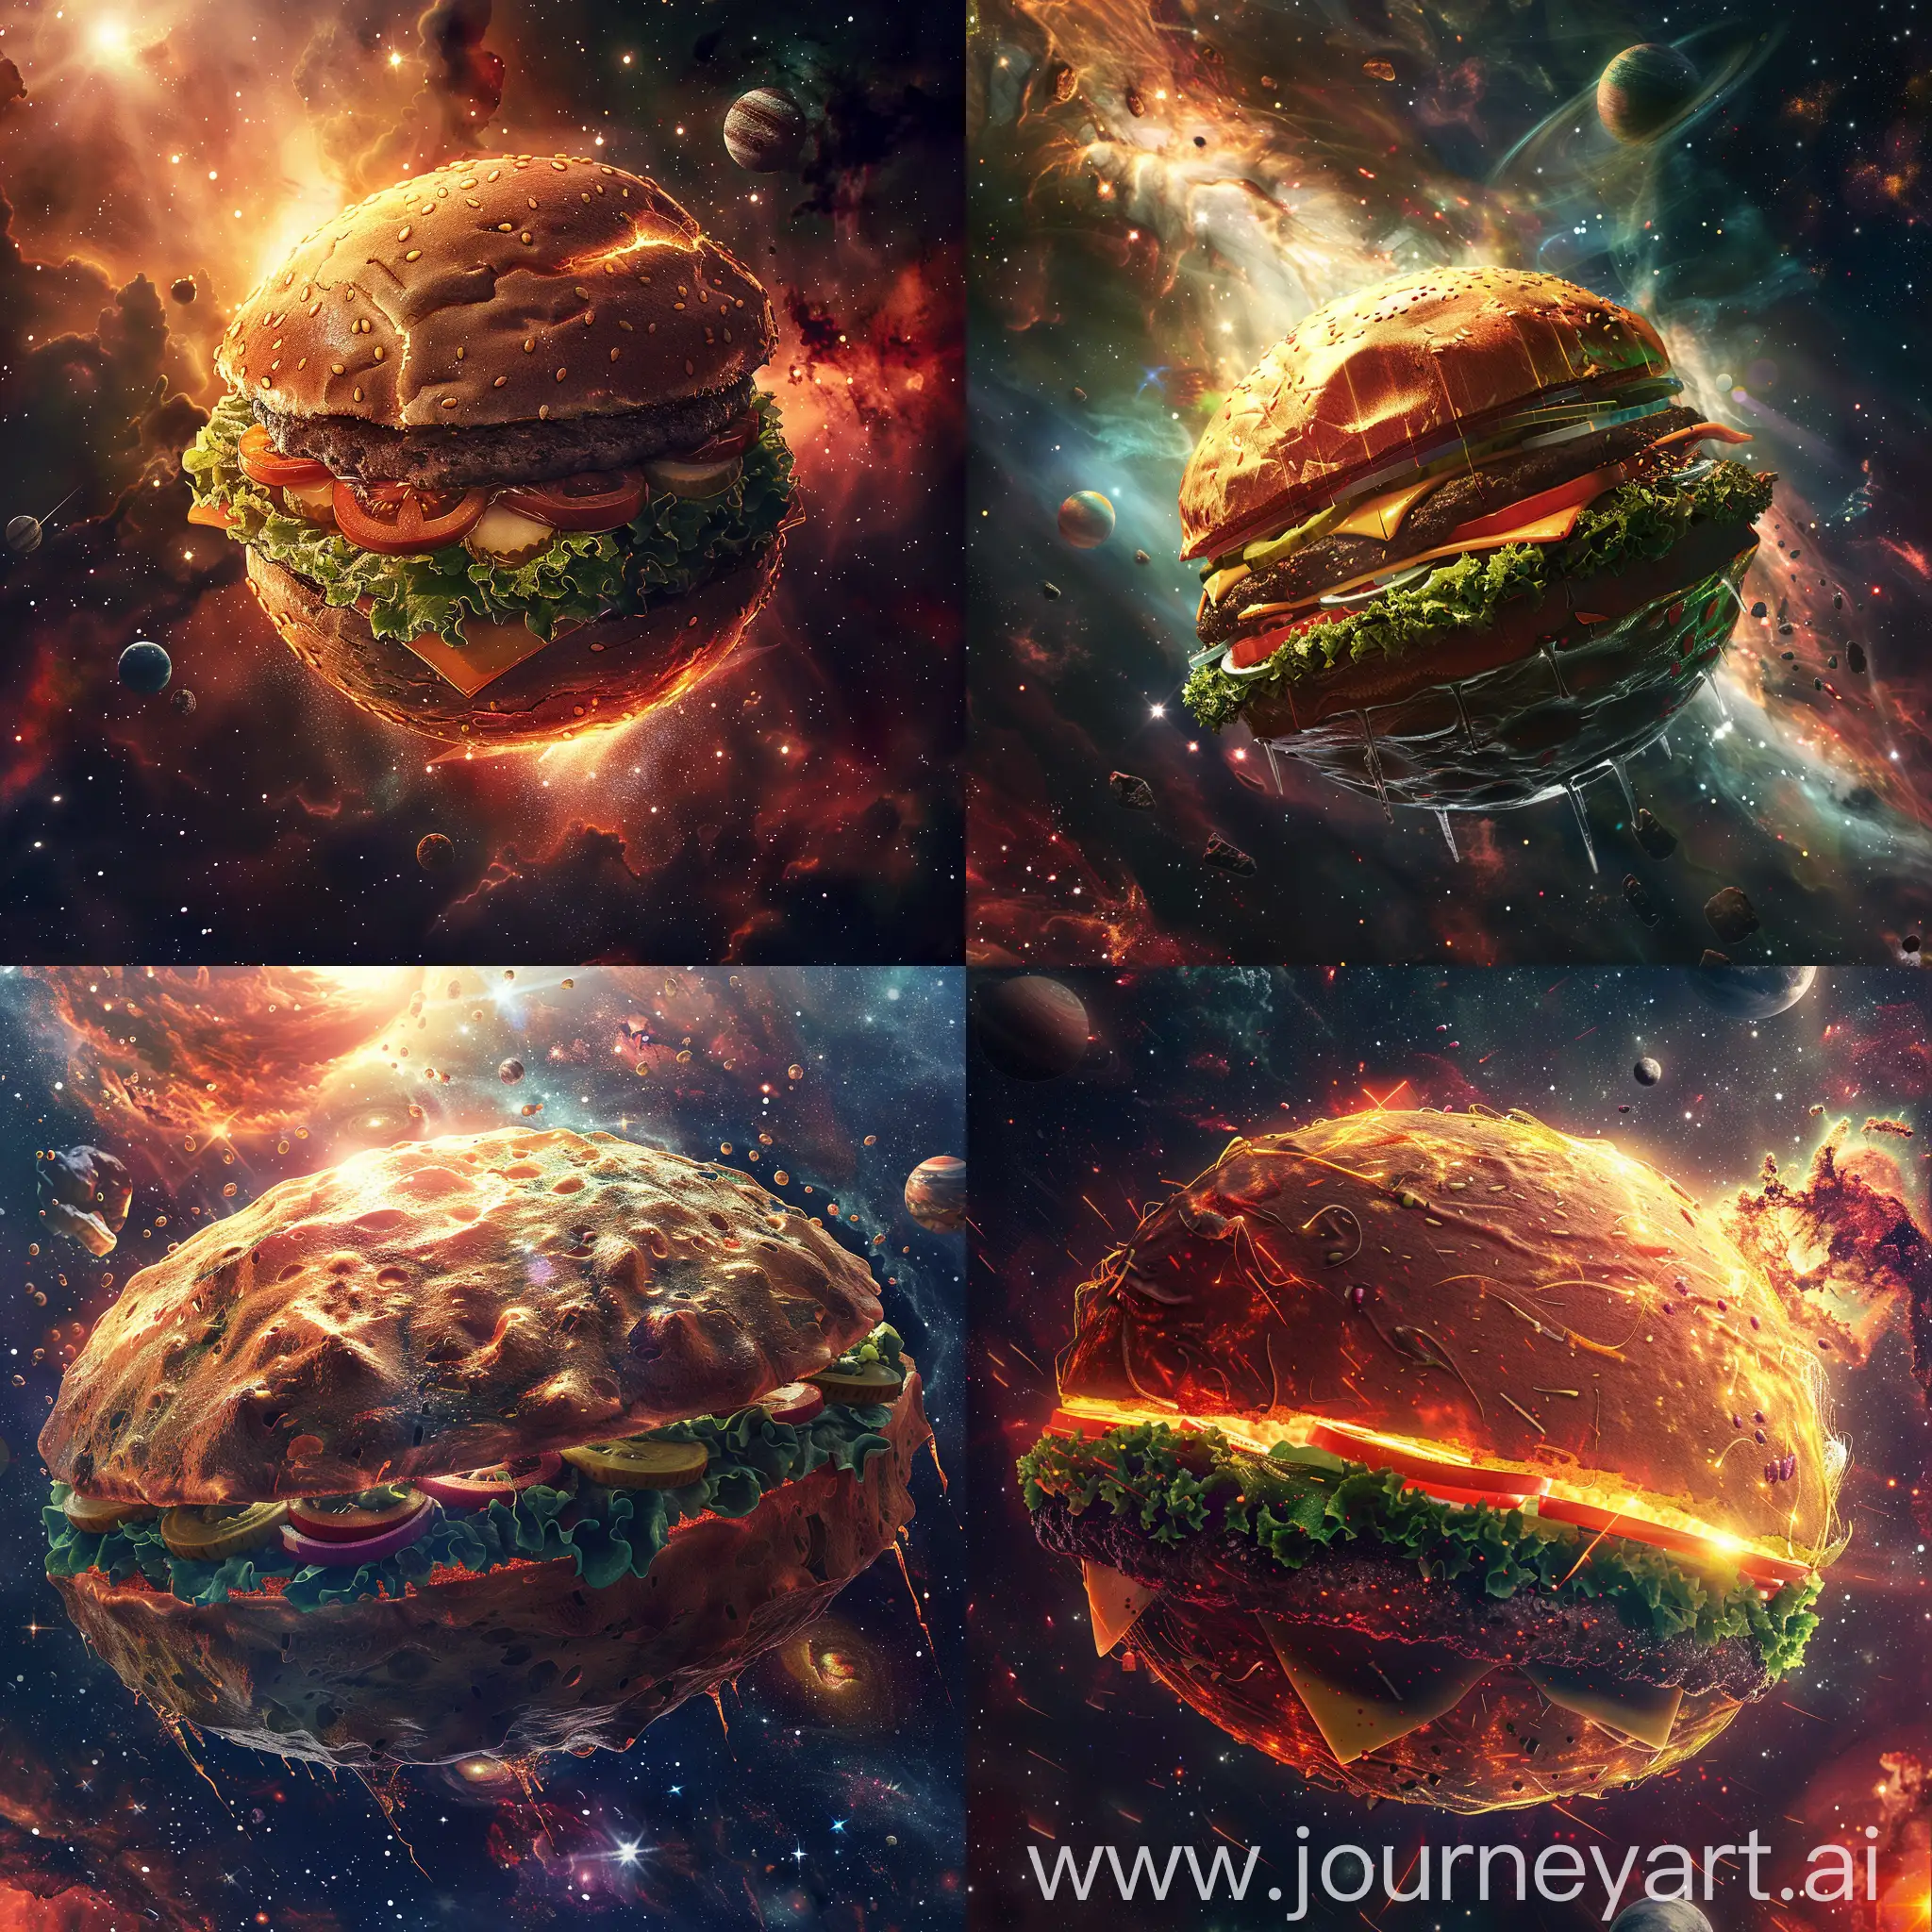 BurgerShaped-Planet-Floating-in-Space-with-Dramatic-Lighting